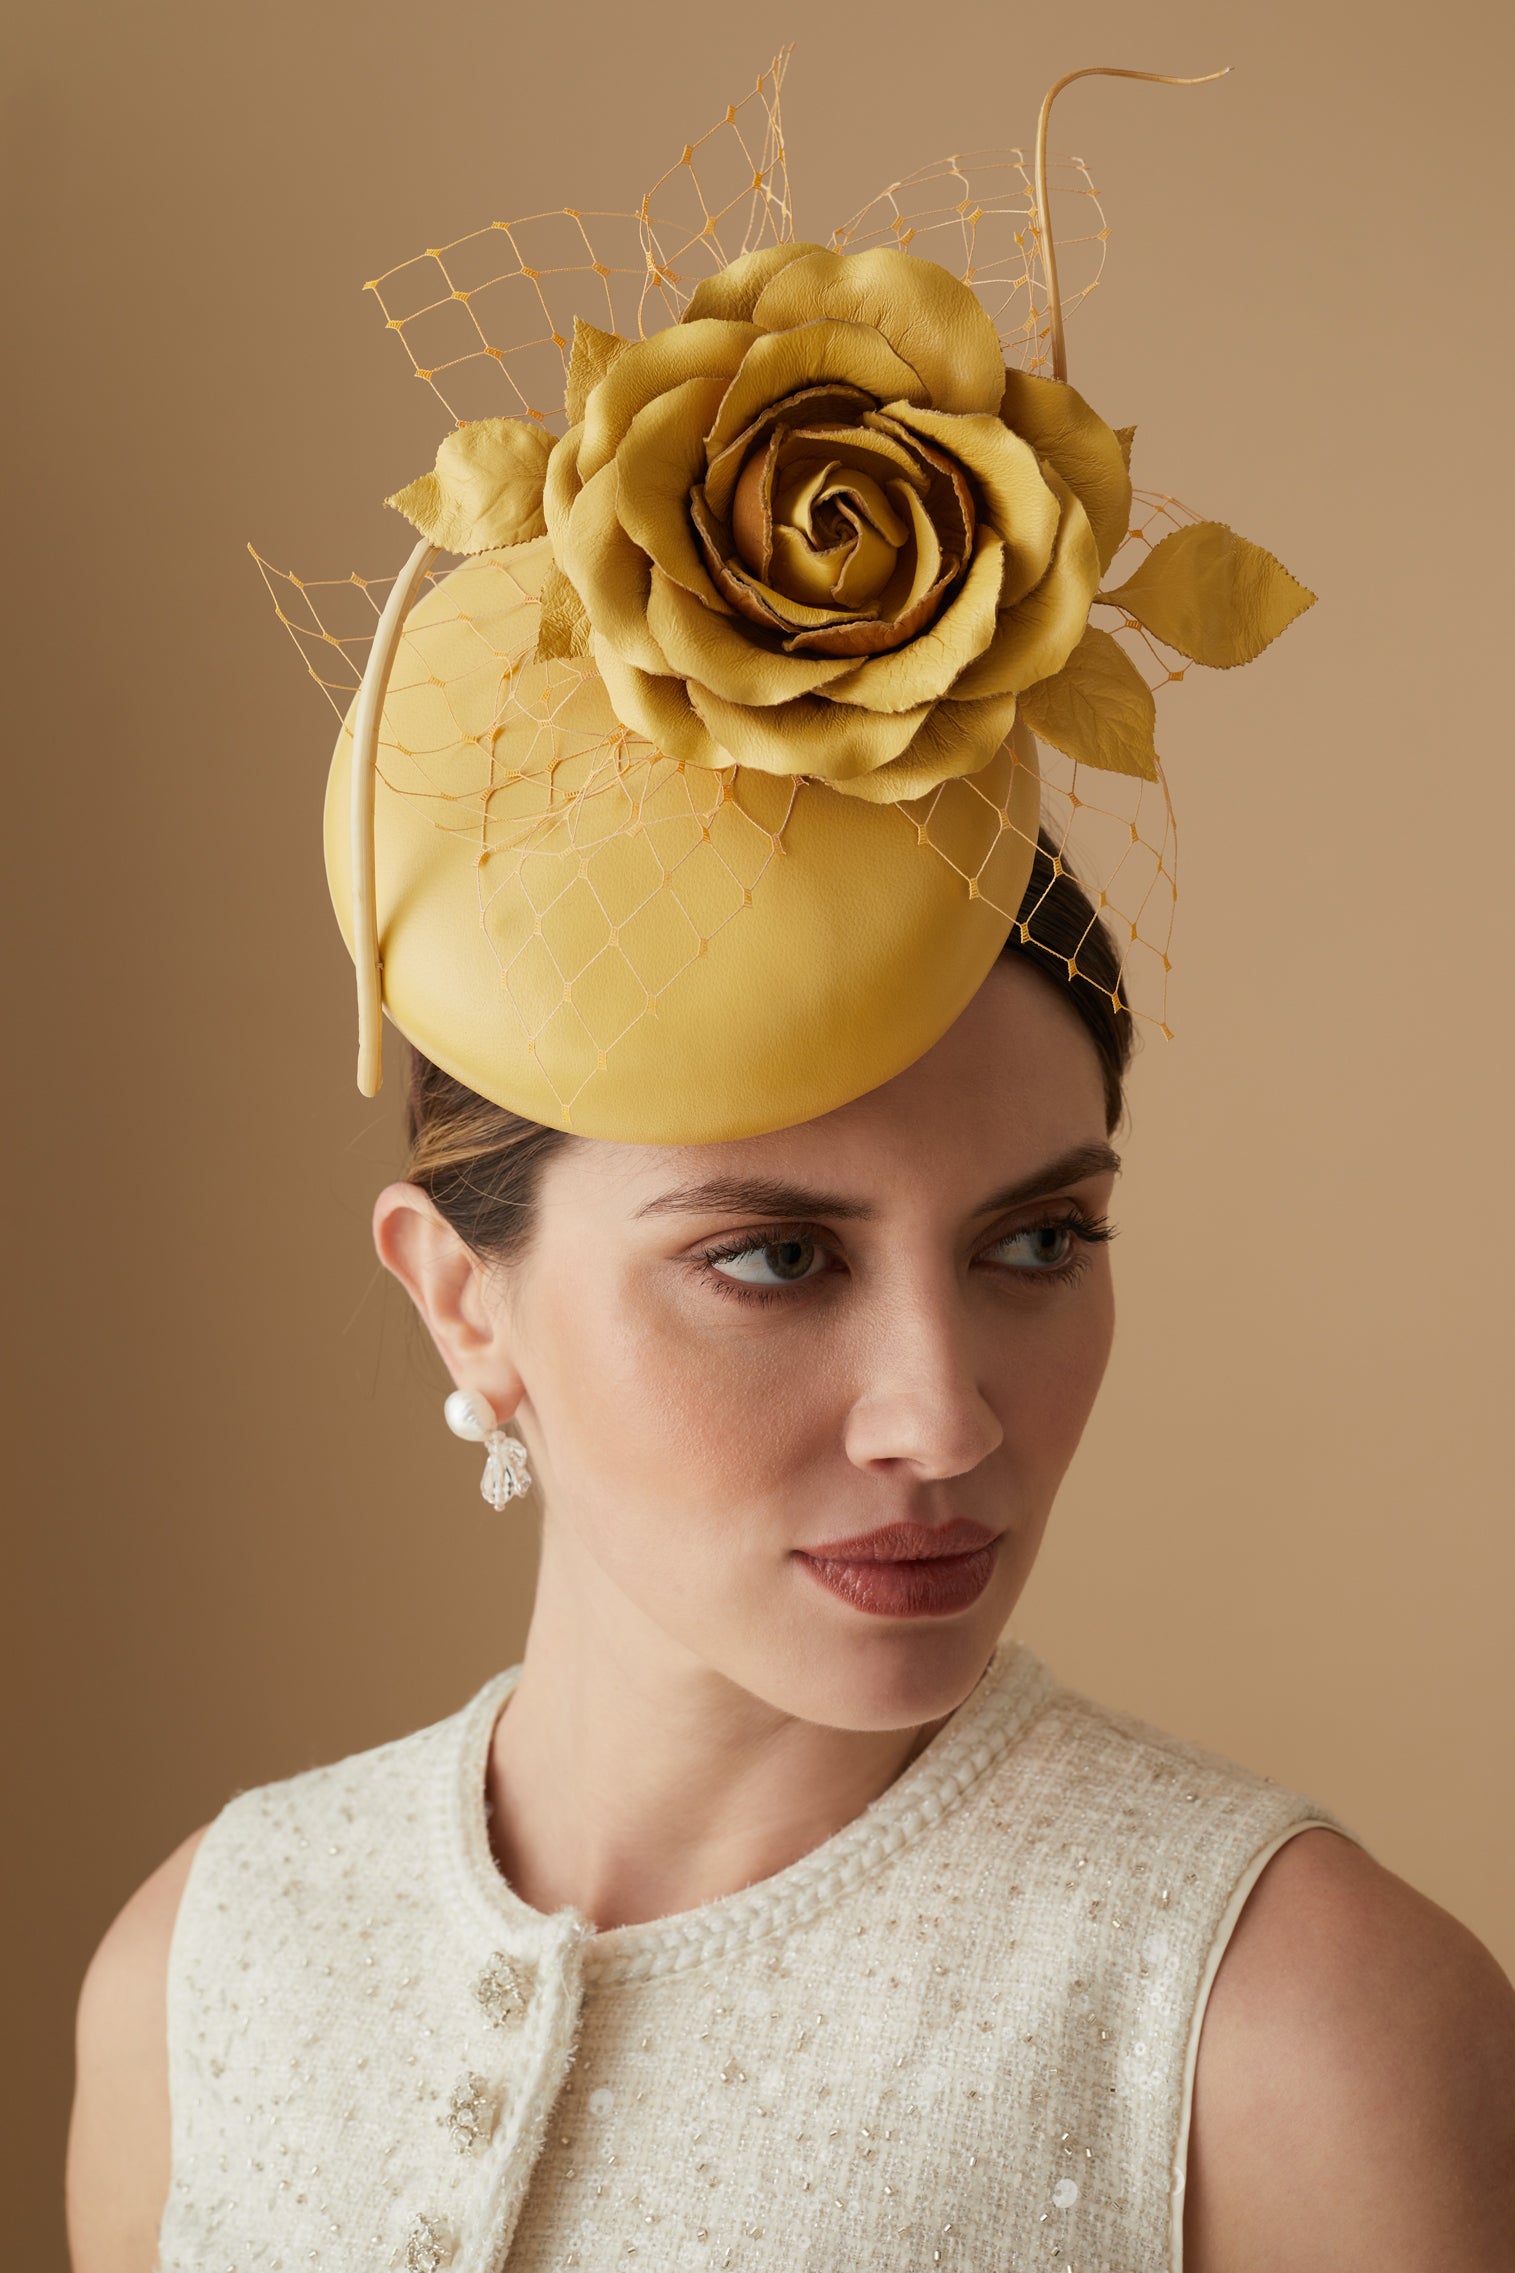 Rose Bud Yellow Leather Percher Hat - Lock Couture by Awon Golding - Lock & Co. Hatters London UK